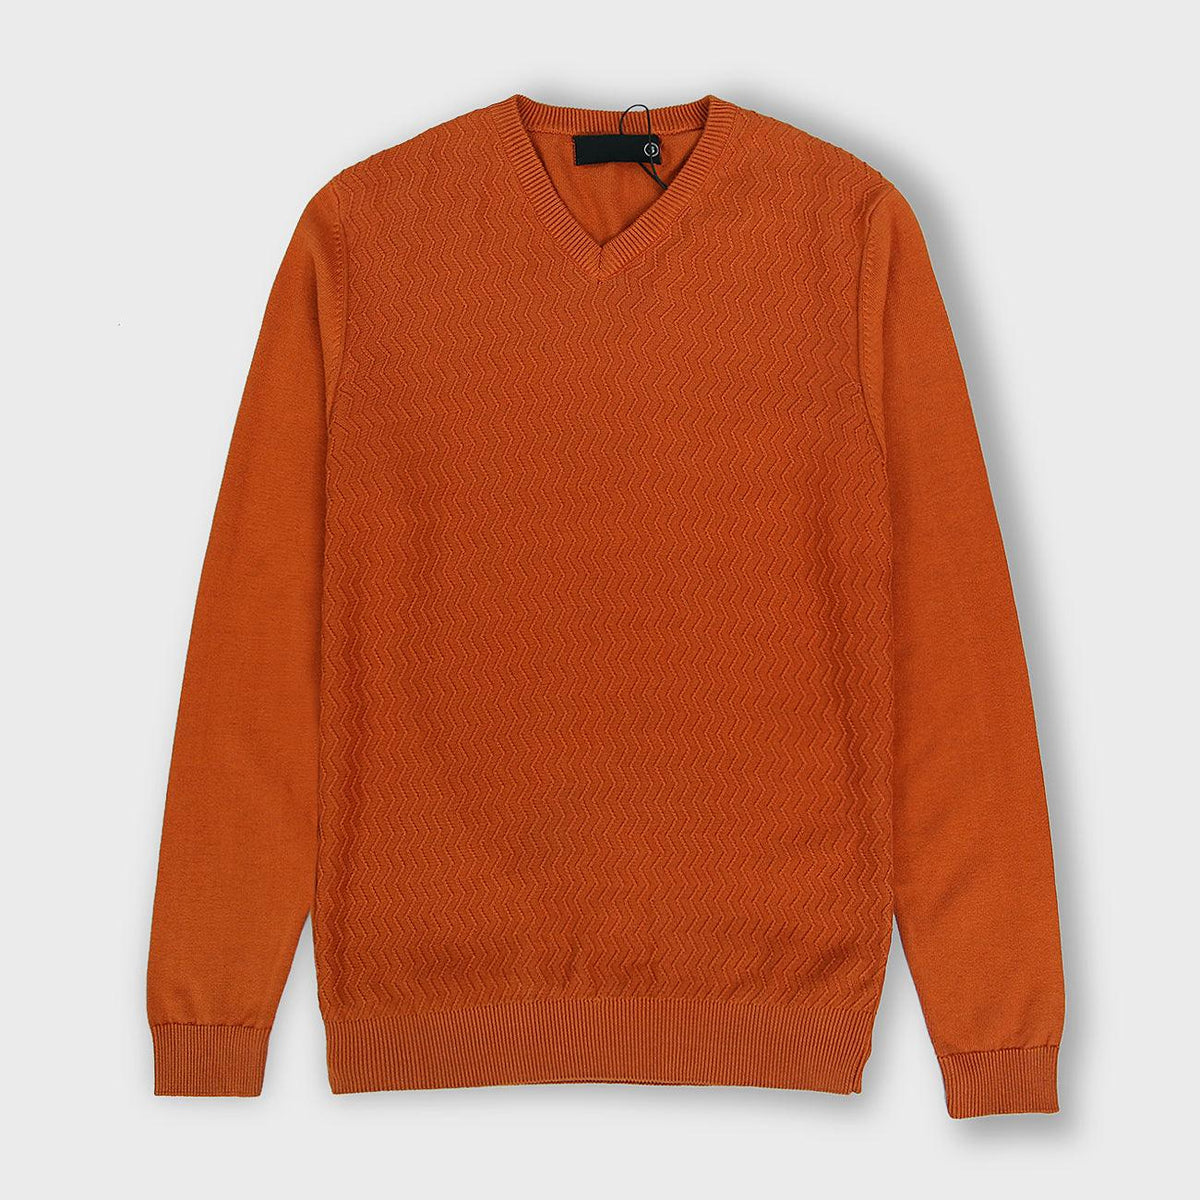 Mens Orange Premium Quality Waves Knitted Wool Sweater (GL-10323) - Brands River